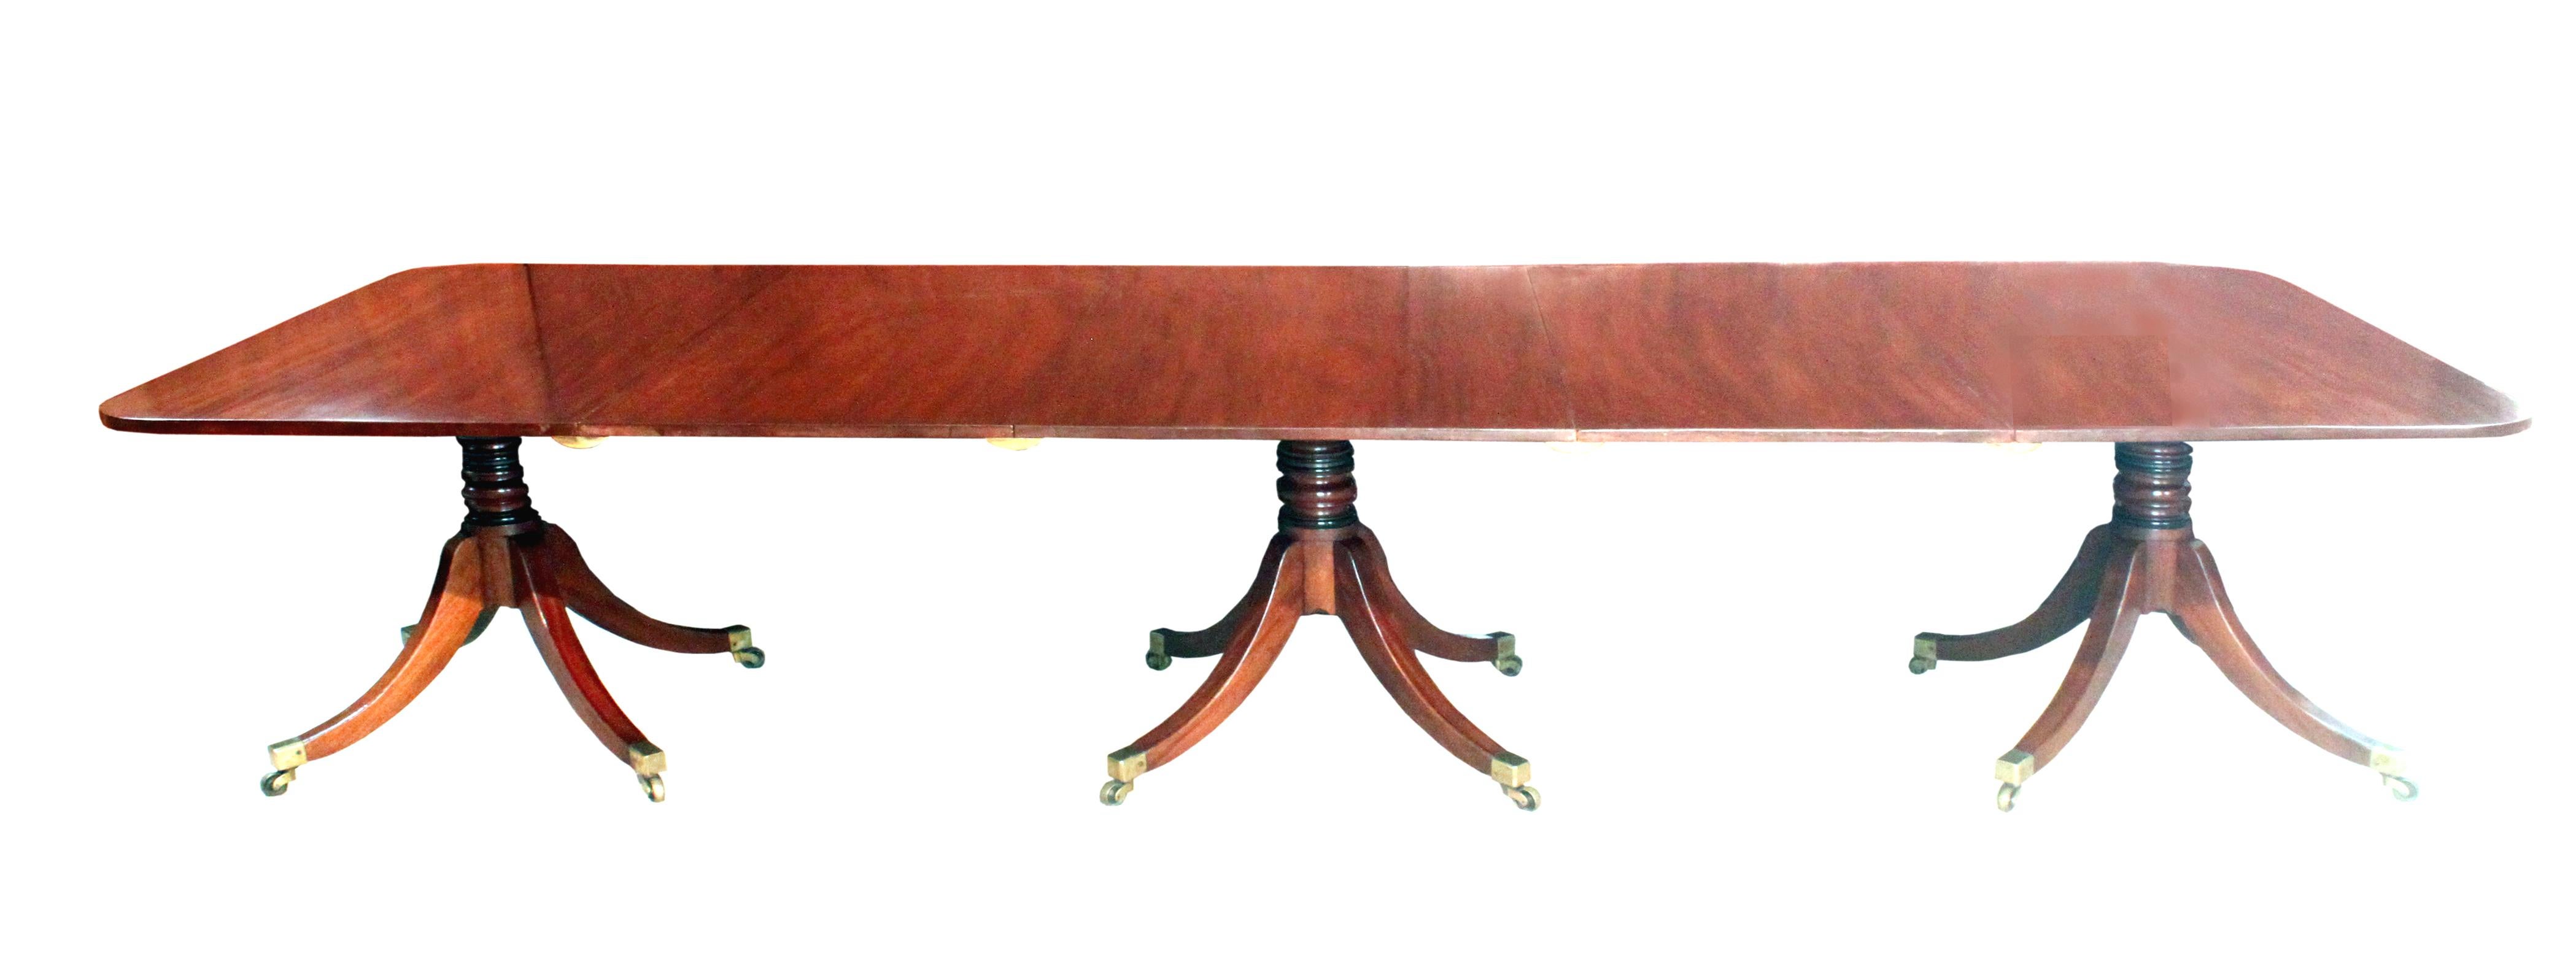 A good Regency triple pillar dining table in figured mahogany, only 48” wide, handsome four splay pedestals with their original tops, the stems with 2 ebonised turnings matching the black ebony stringing in the sabre legs. The castors stamped with a